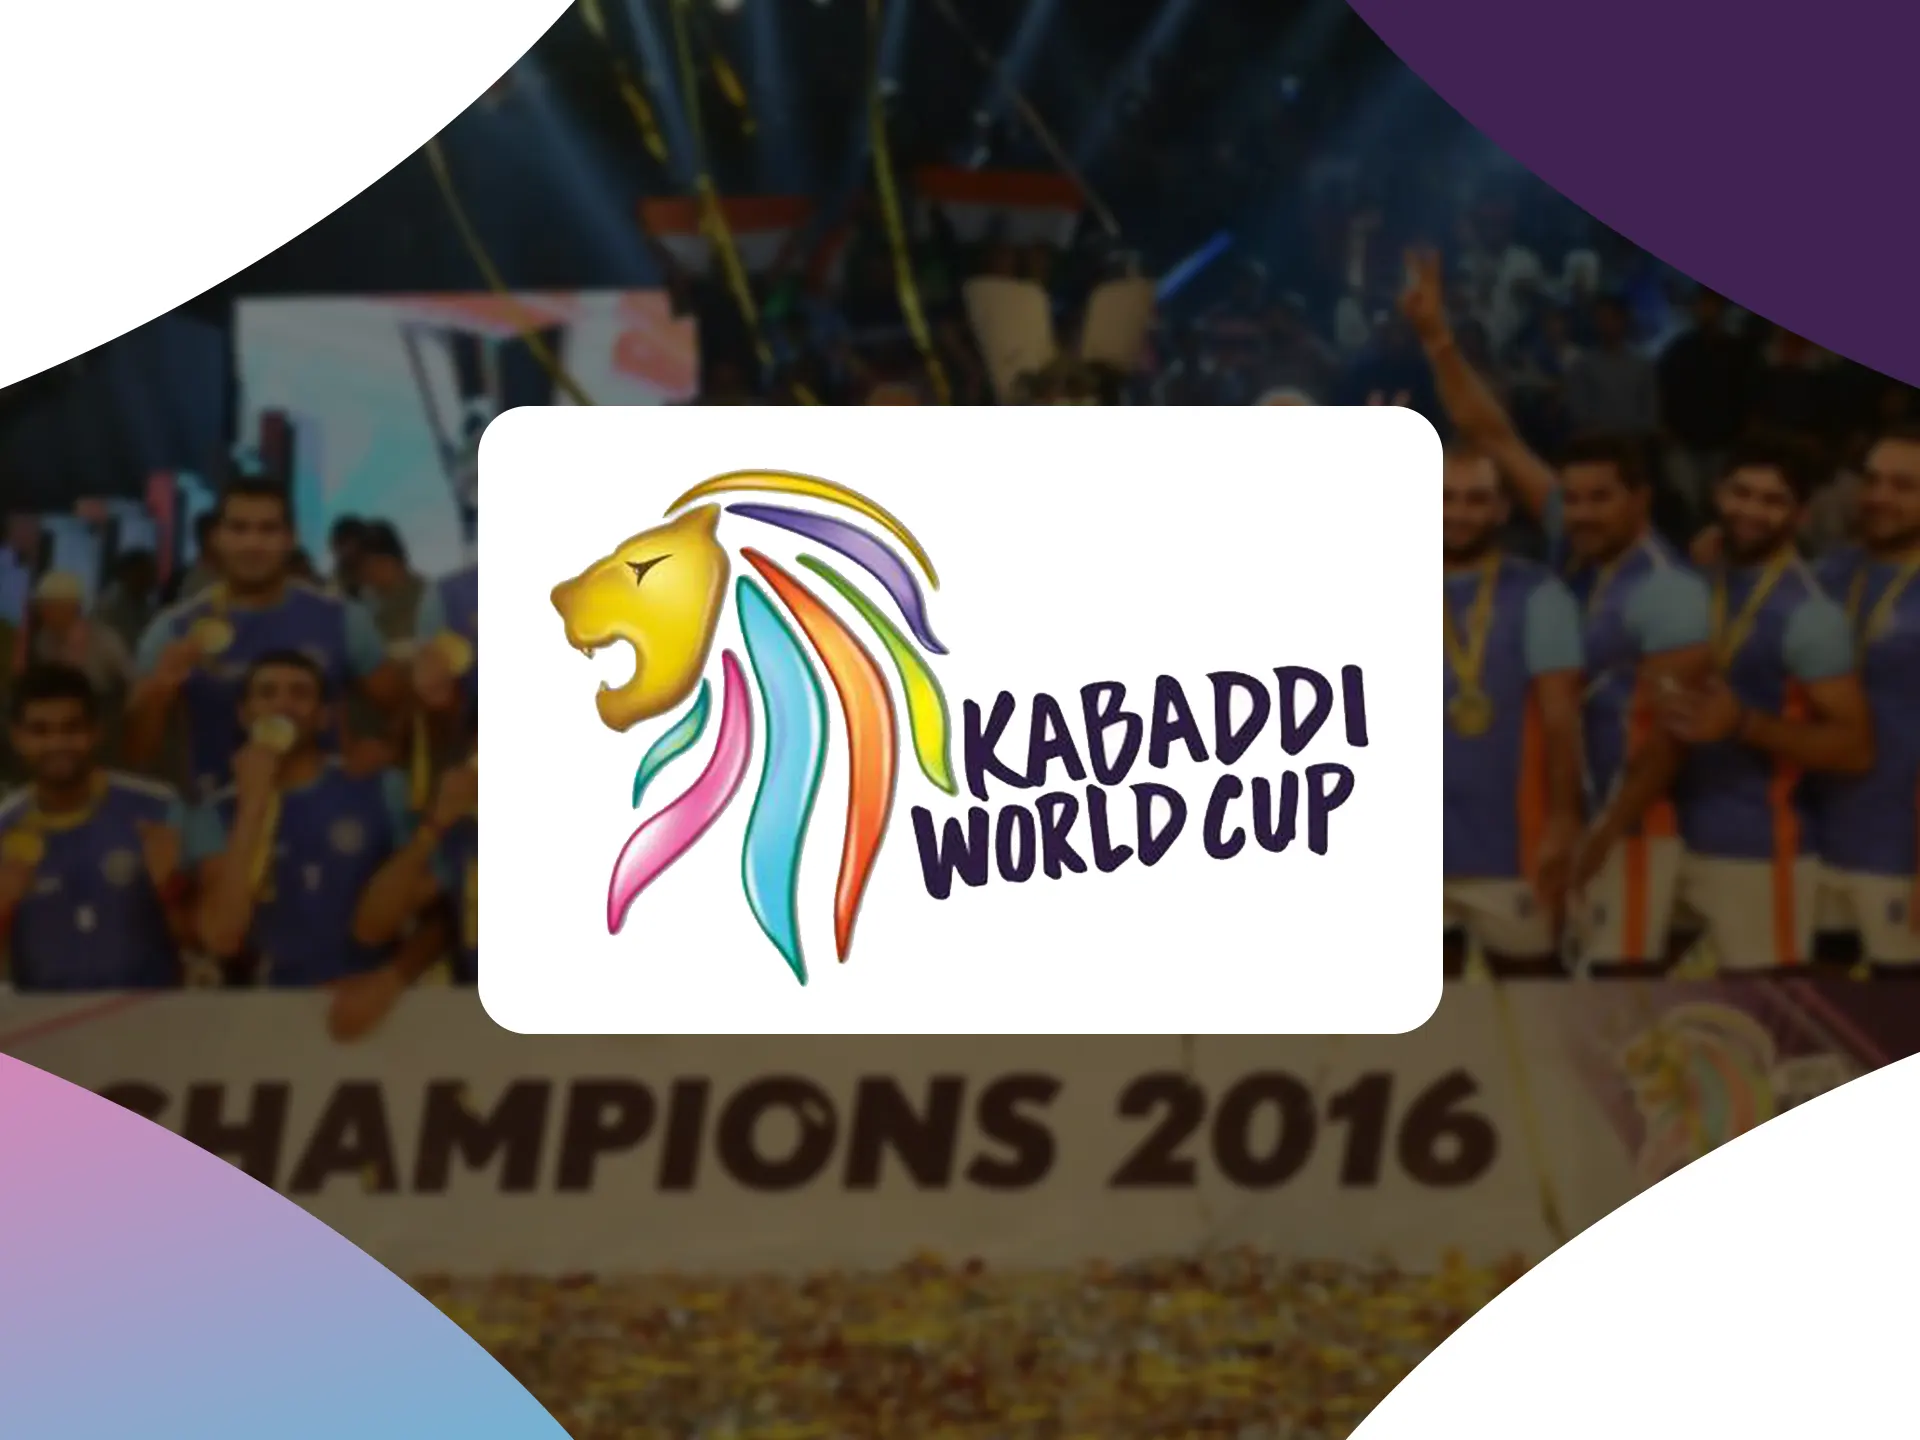 Watch and bet on matches of the Kabaddi World Cup.